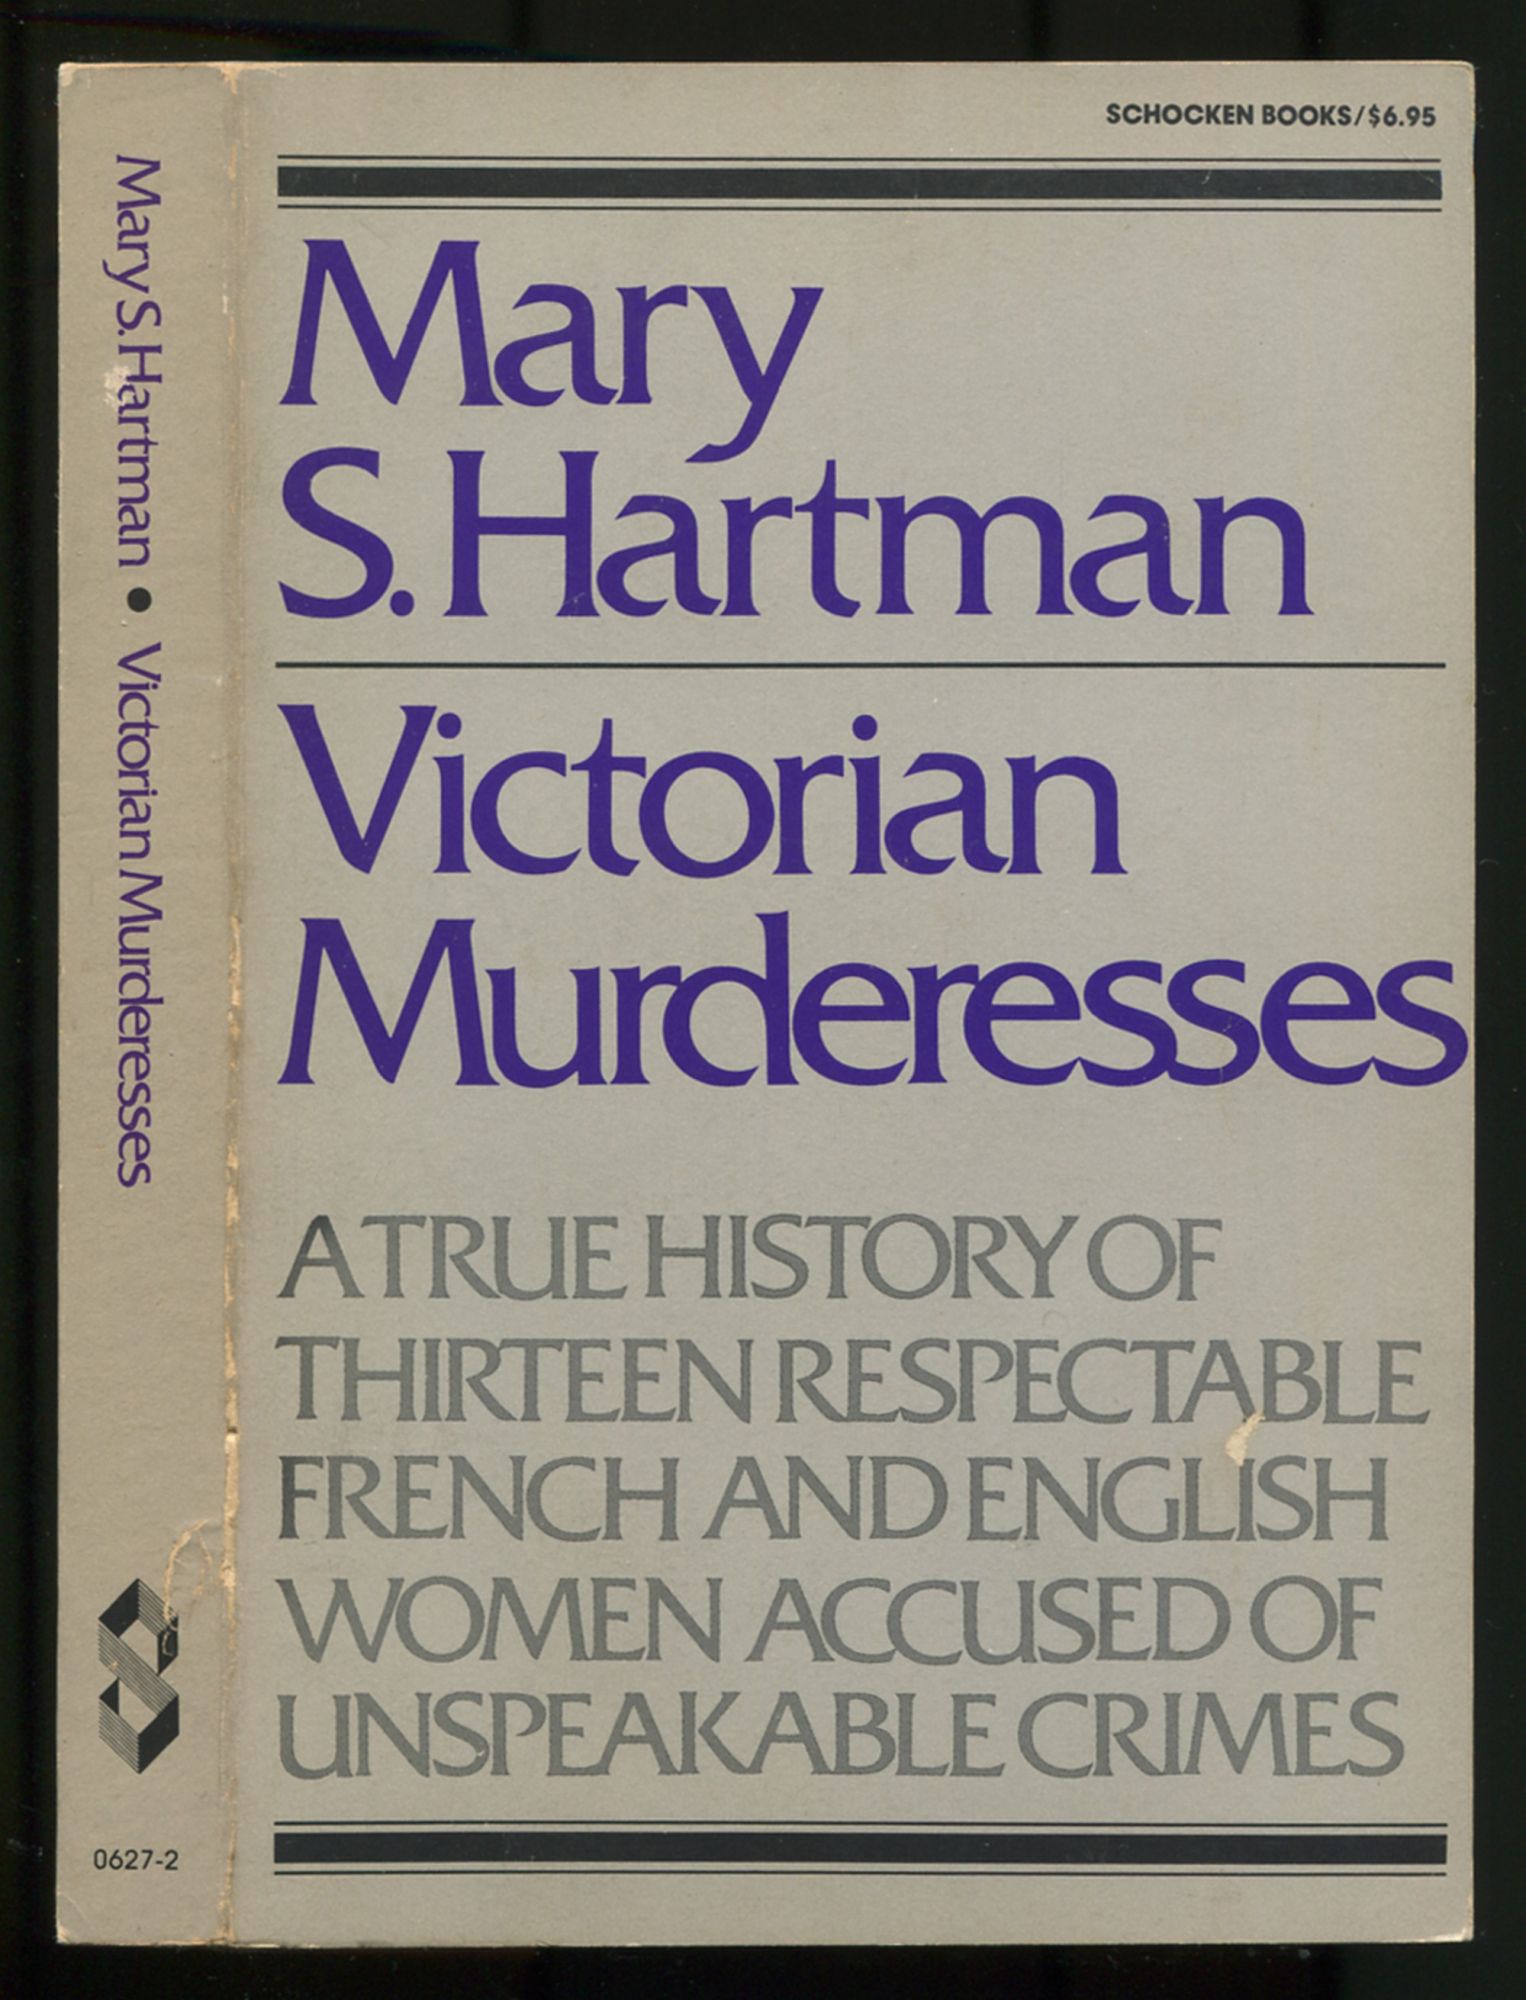 Victorian Murderesses A True History Of Thriteen Respectable French And English Women Accused